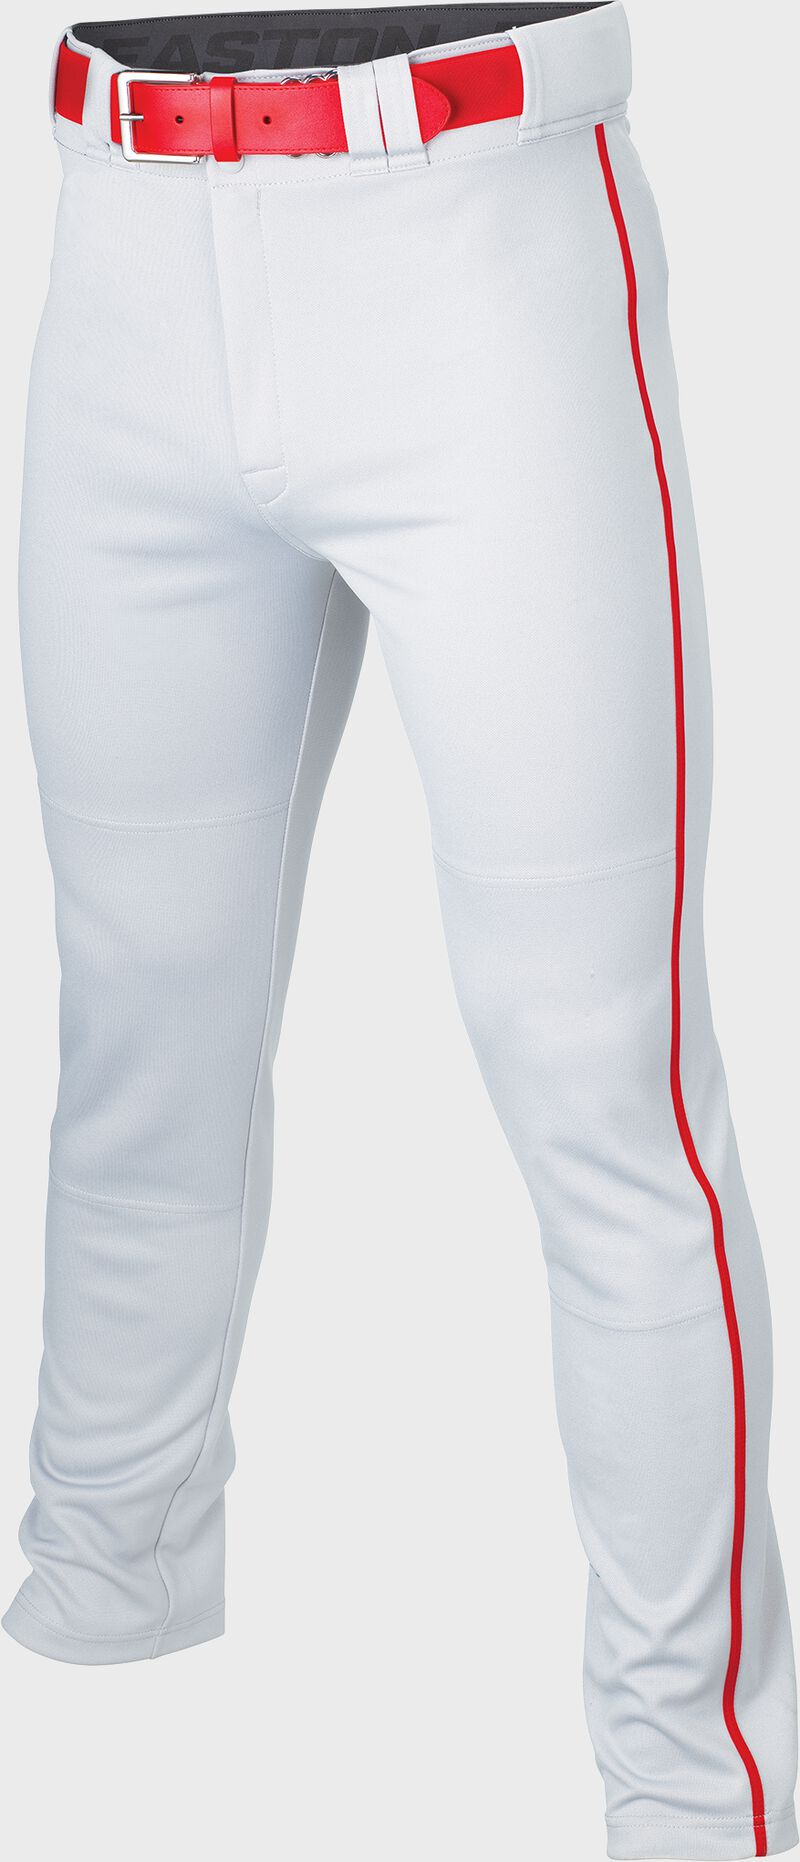 RIVAL+ PANT ADULT PIPED WHITE/RED M